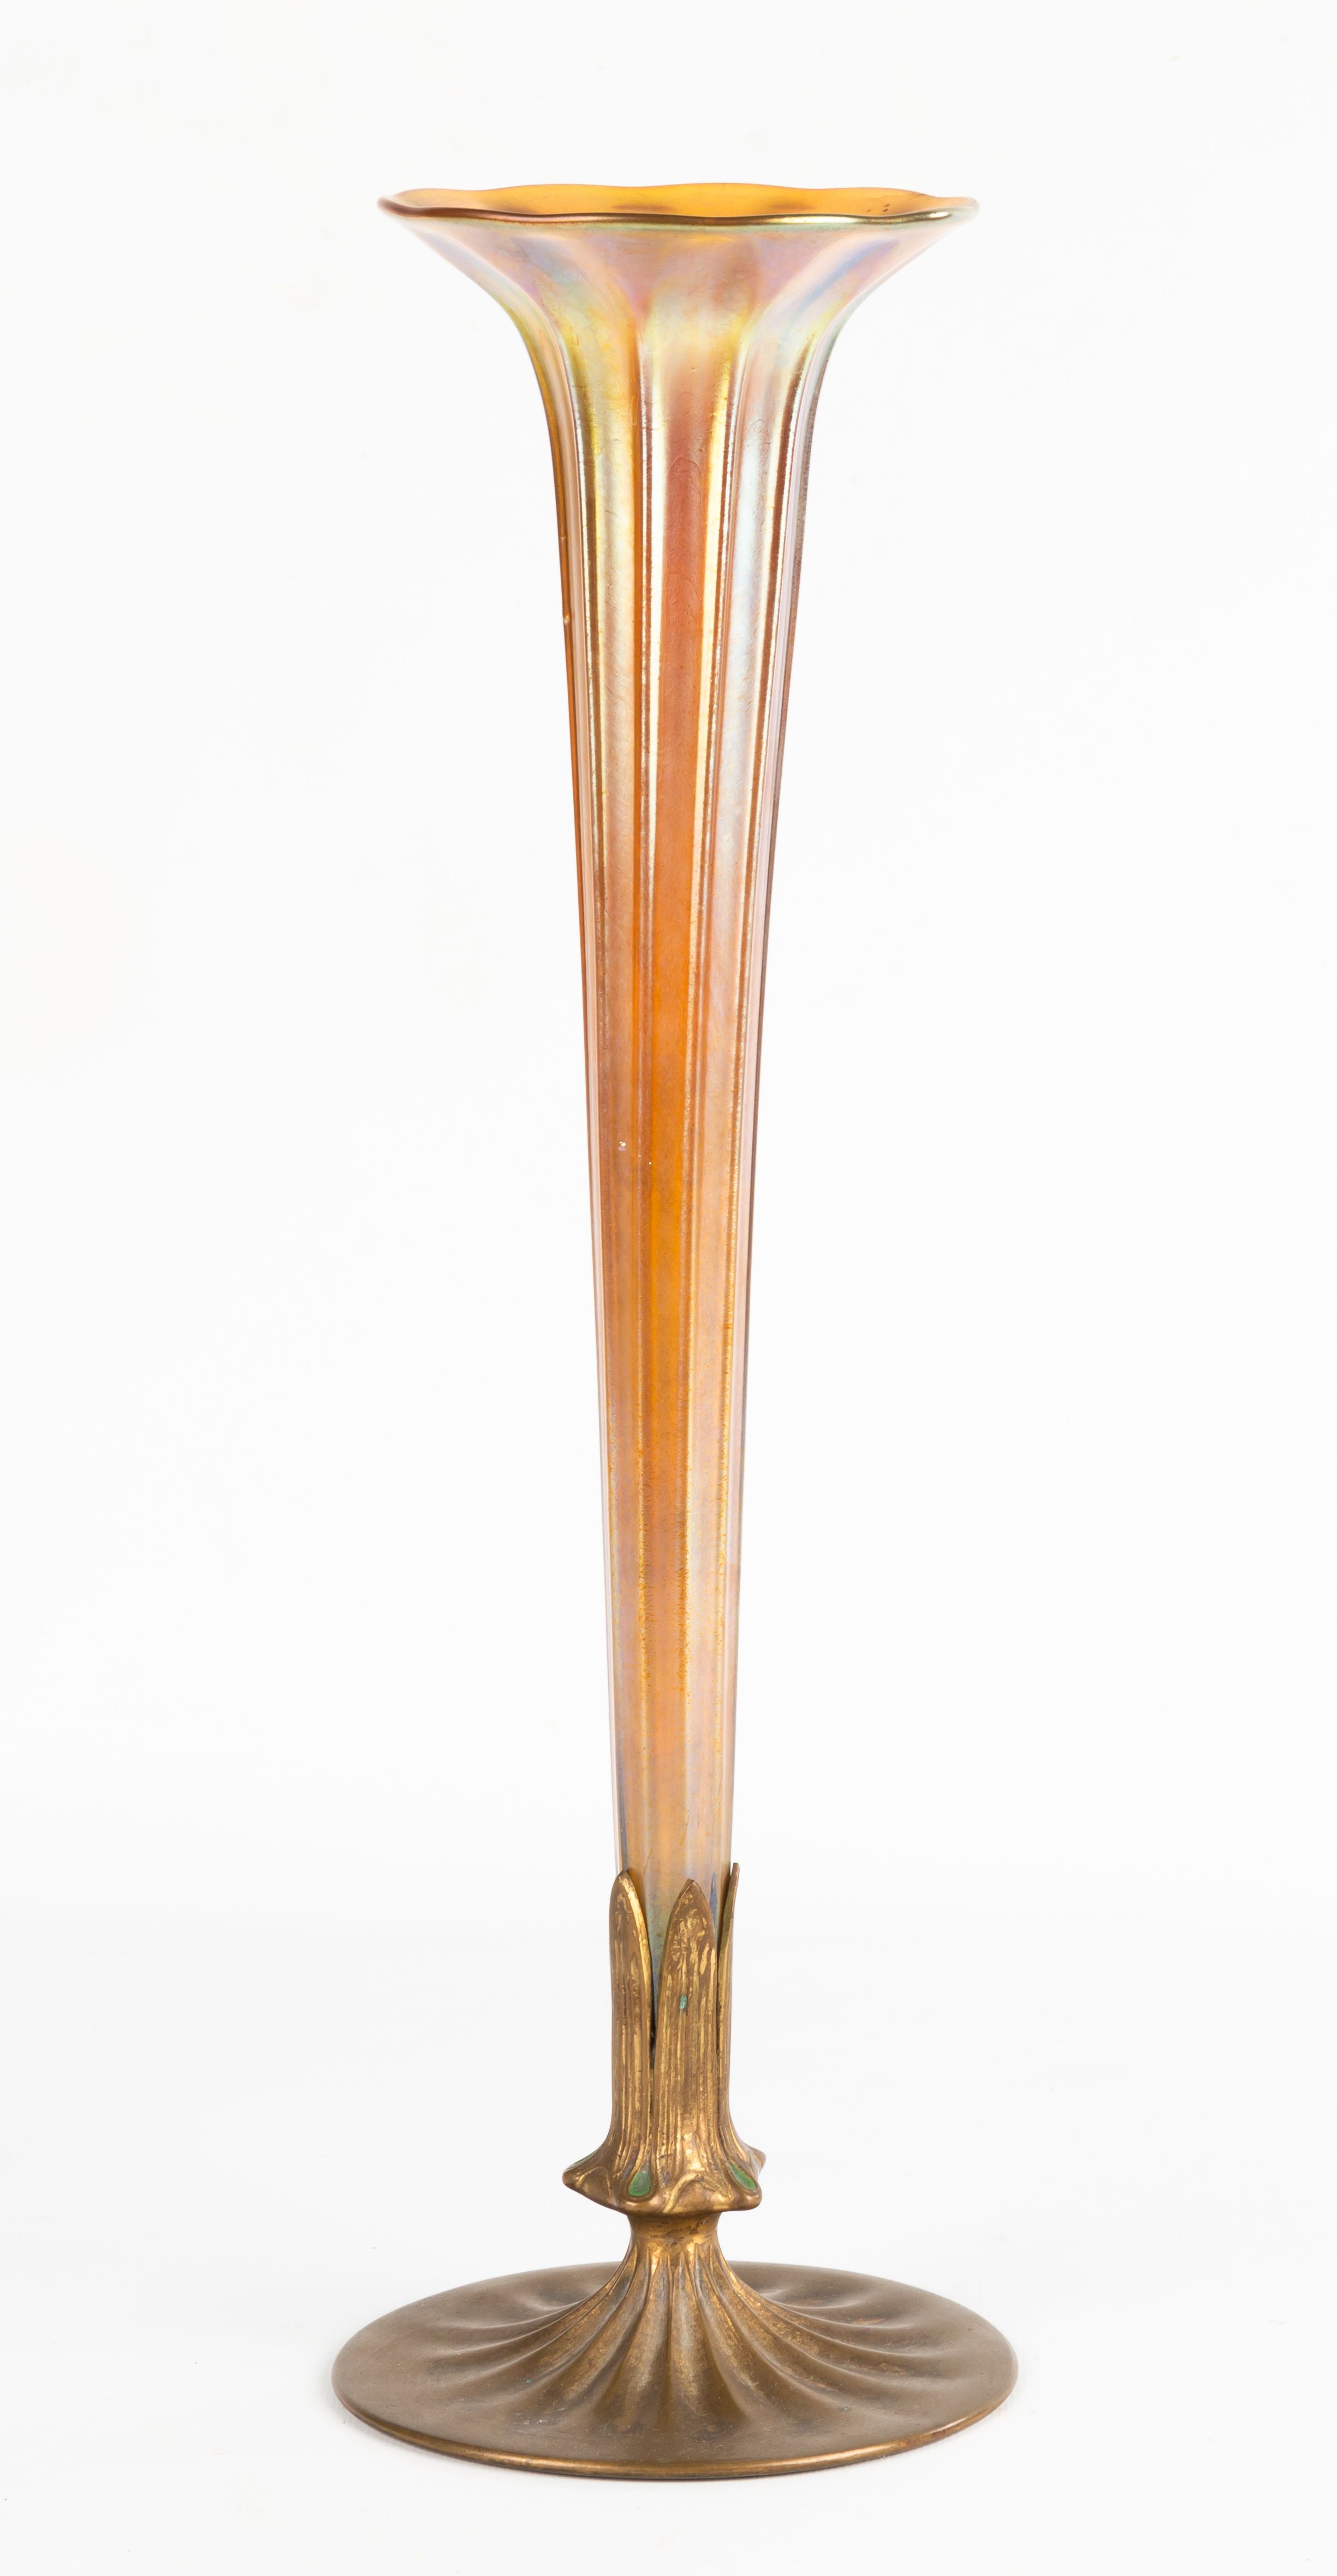 Tiffany Studios Favrile Vase with Bronze Base | Cottone Auctions